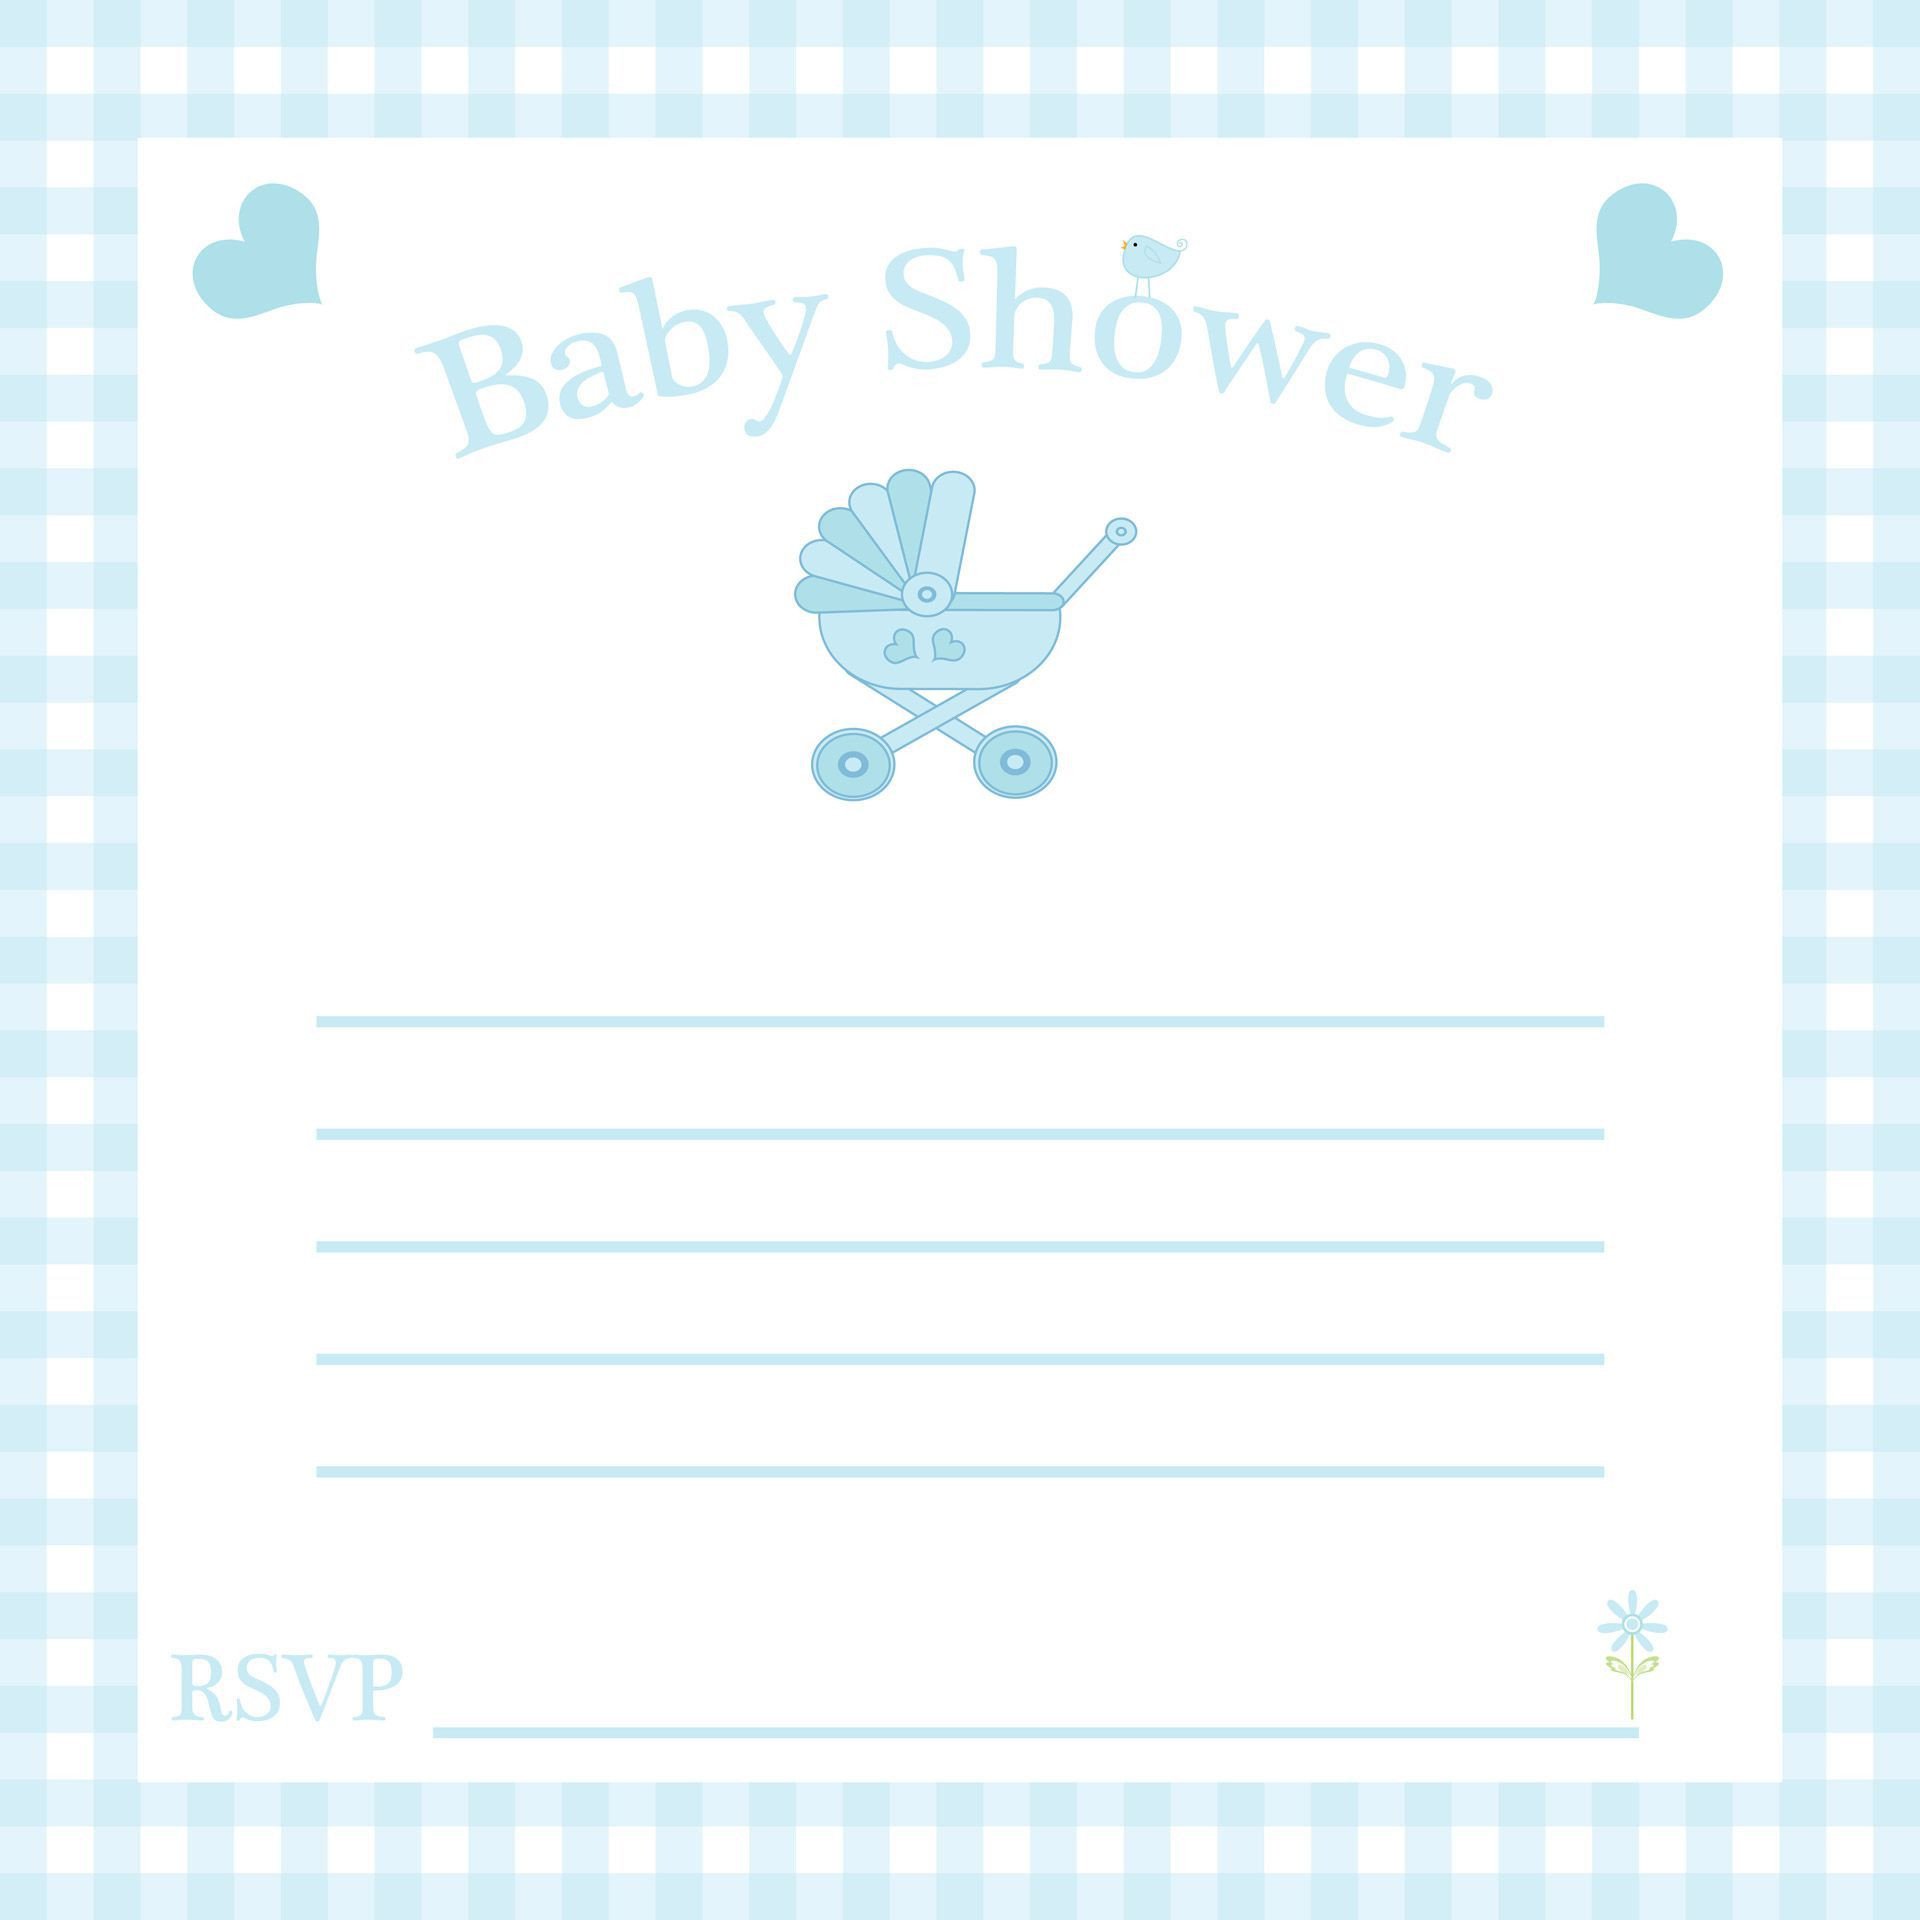 Baby Shower Invitation Free Template Graduation Party Free Baby Invitation Template Card